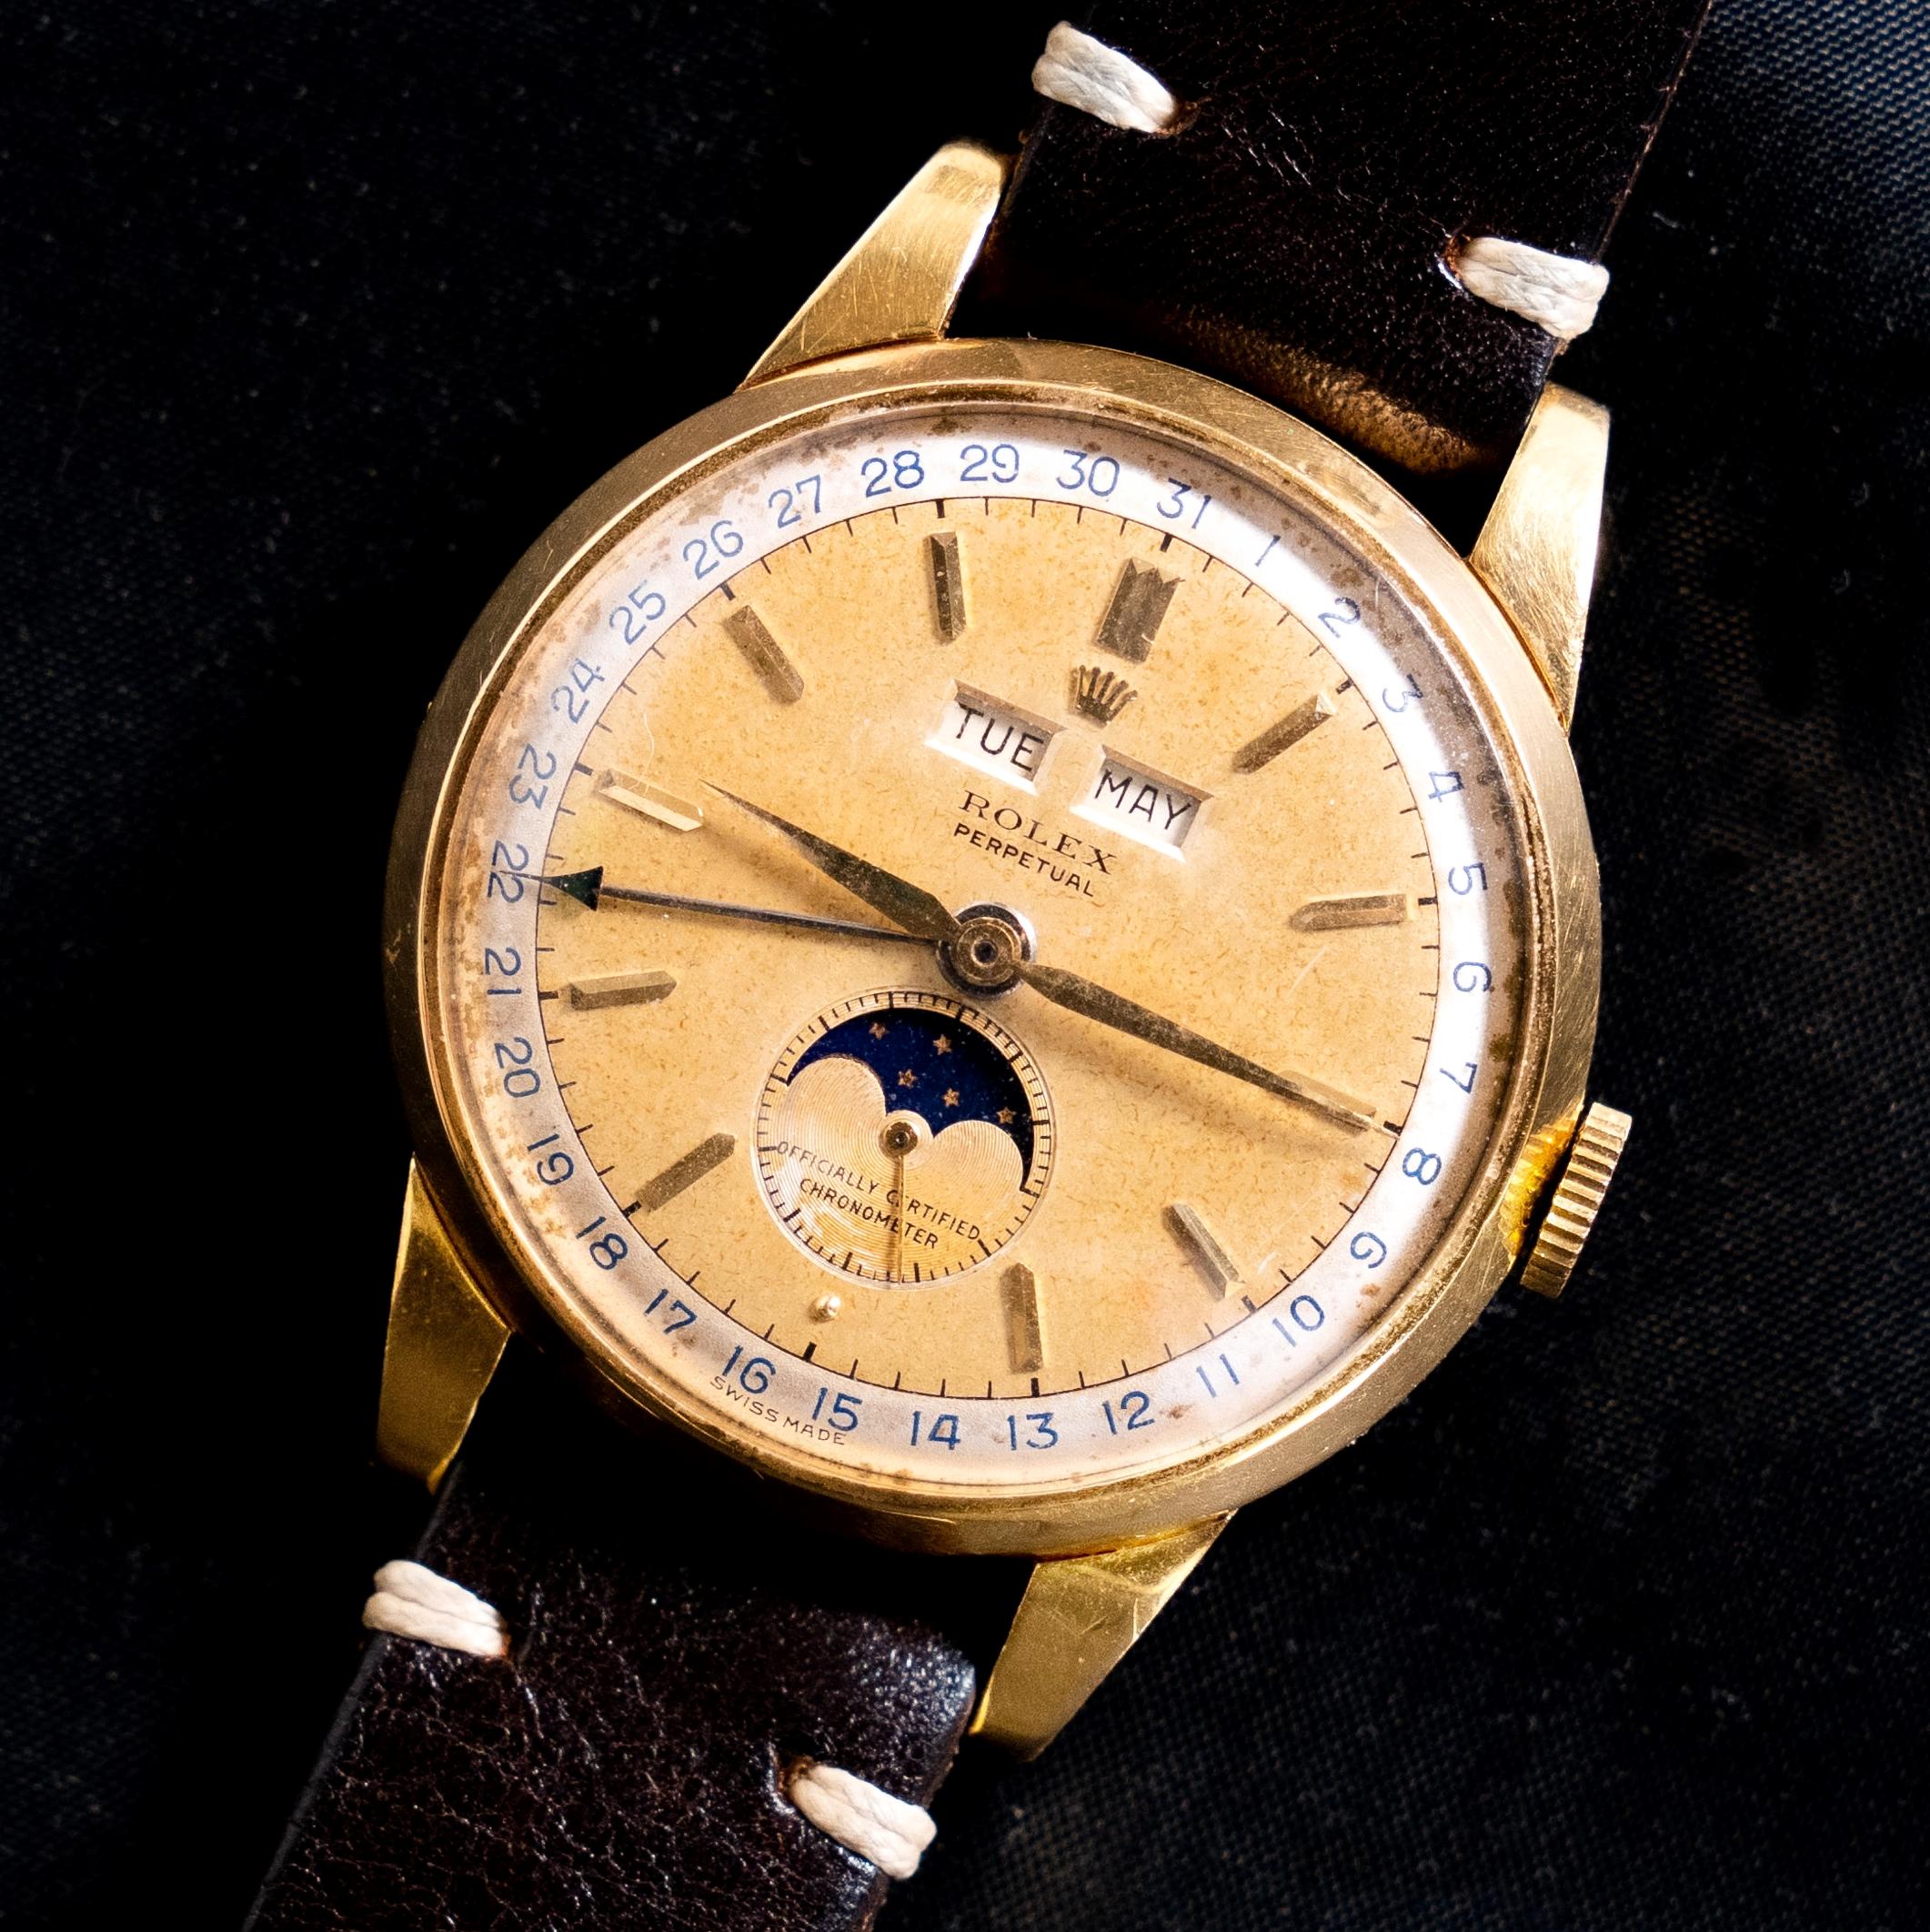 Brand: Vintage Rolex
Model: 8171
Year: 1950
Serial number: 71xxxx
Reference: OT1852

The Rolex reference 8171, manufactured for a brief period from 1949 to 1952, stands out as one of Rolex’s most intricate timepieces. Alongside the reference 6062,